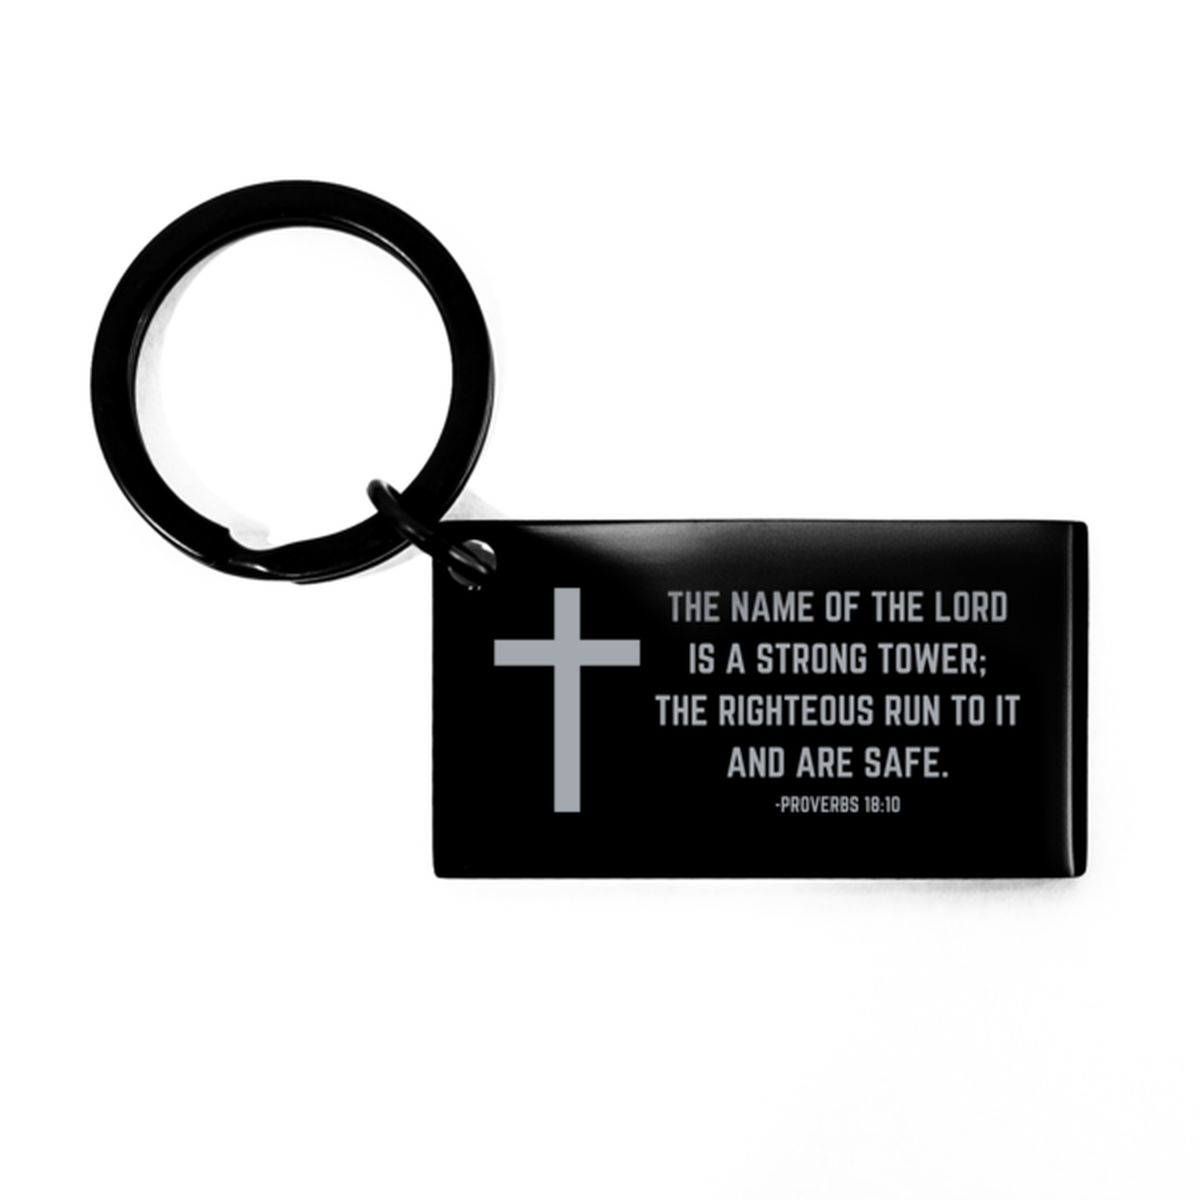 Baptism Gifts For Teenage Boys Girls, Christian Bible Verse Black Keychain, The name of the Lord is a strong, Confirmation Gifts, Bible Verse Keyring for Son, Godson, Grandson, Nephew